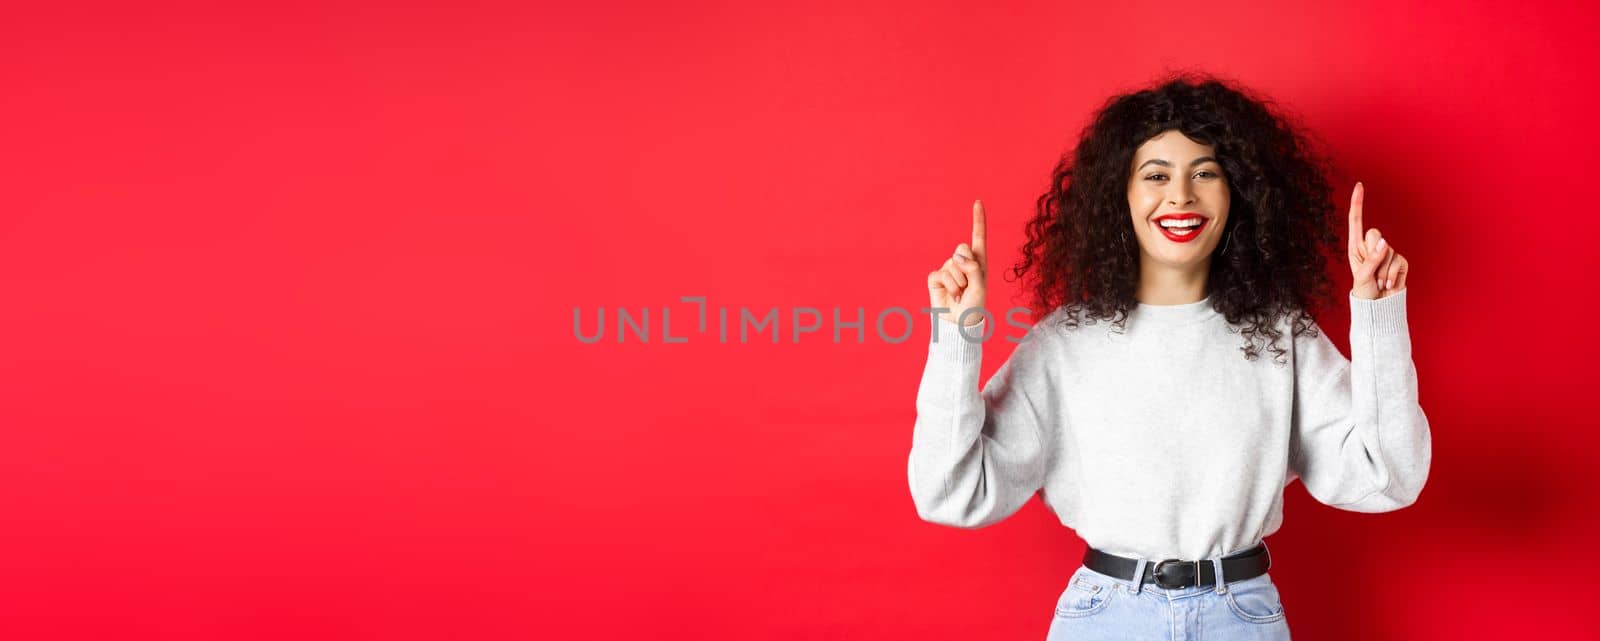 Happy young woman with curly hair, pointing fingers up and laughing, showing perfect white smile, standing against red background.